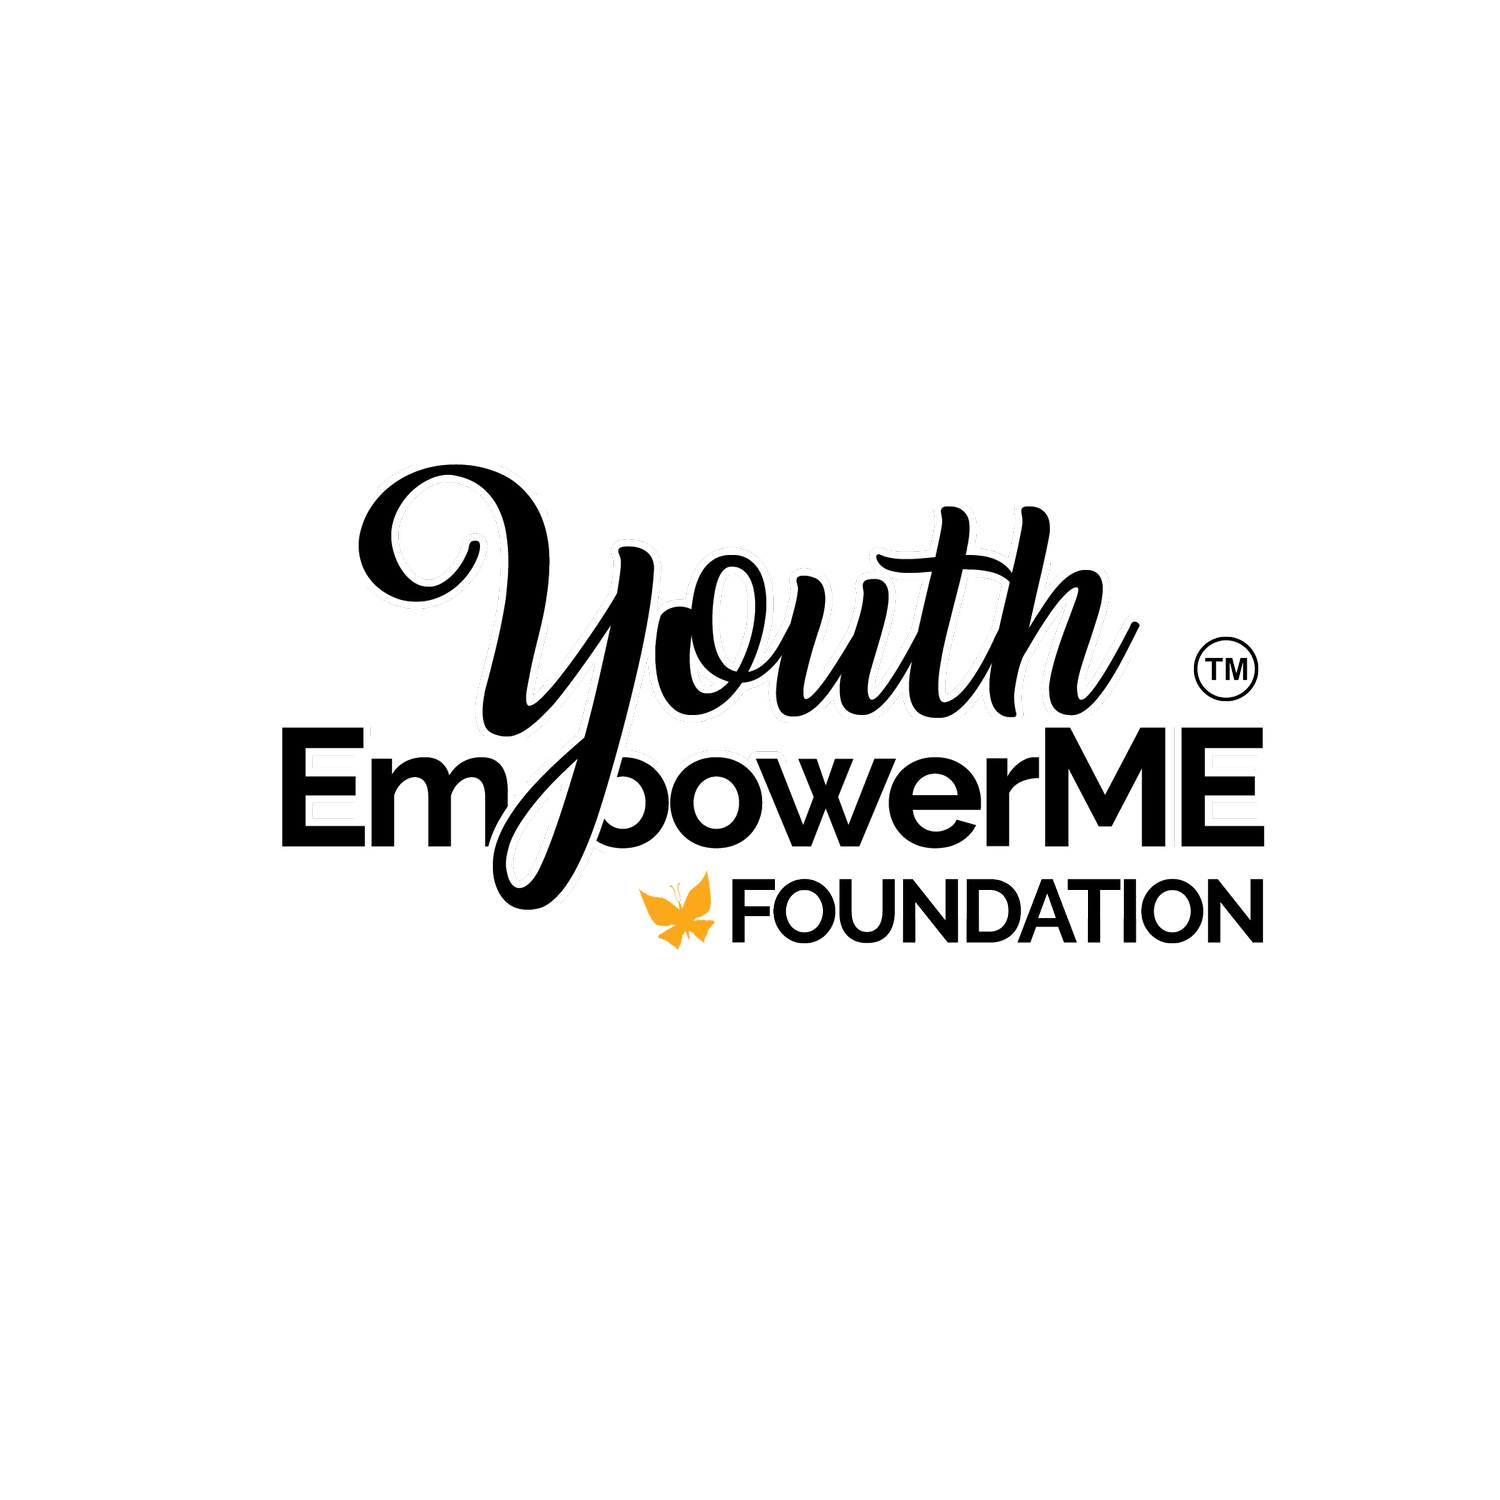 Youth EmpowerMe Foundation Inc.